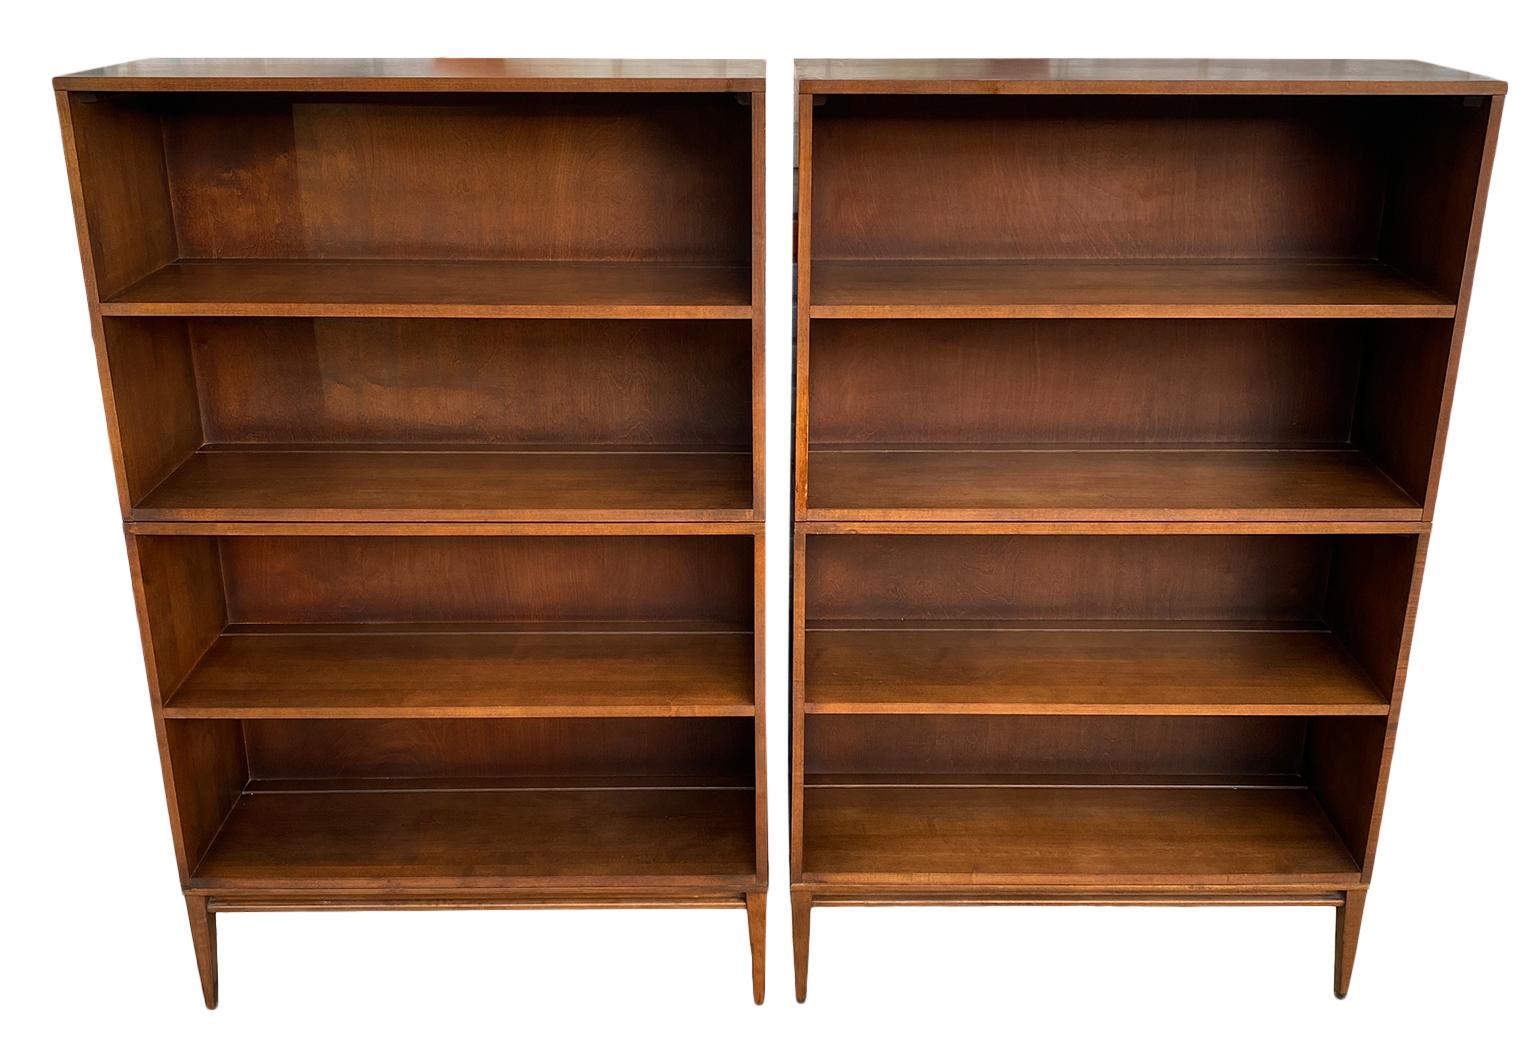 Pair of vintage midcentury Paul McCobb Double high bookcases bookshelves #1516 original walnut finish over solid maple with solid maple 4 leg base. Beautiful bookcase set by Paul McCobb, circa 1950s Planner Group, single center fixed shelf, solid